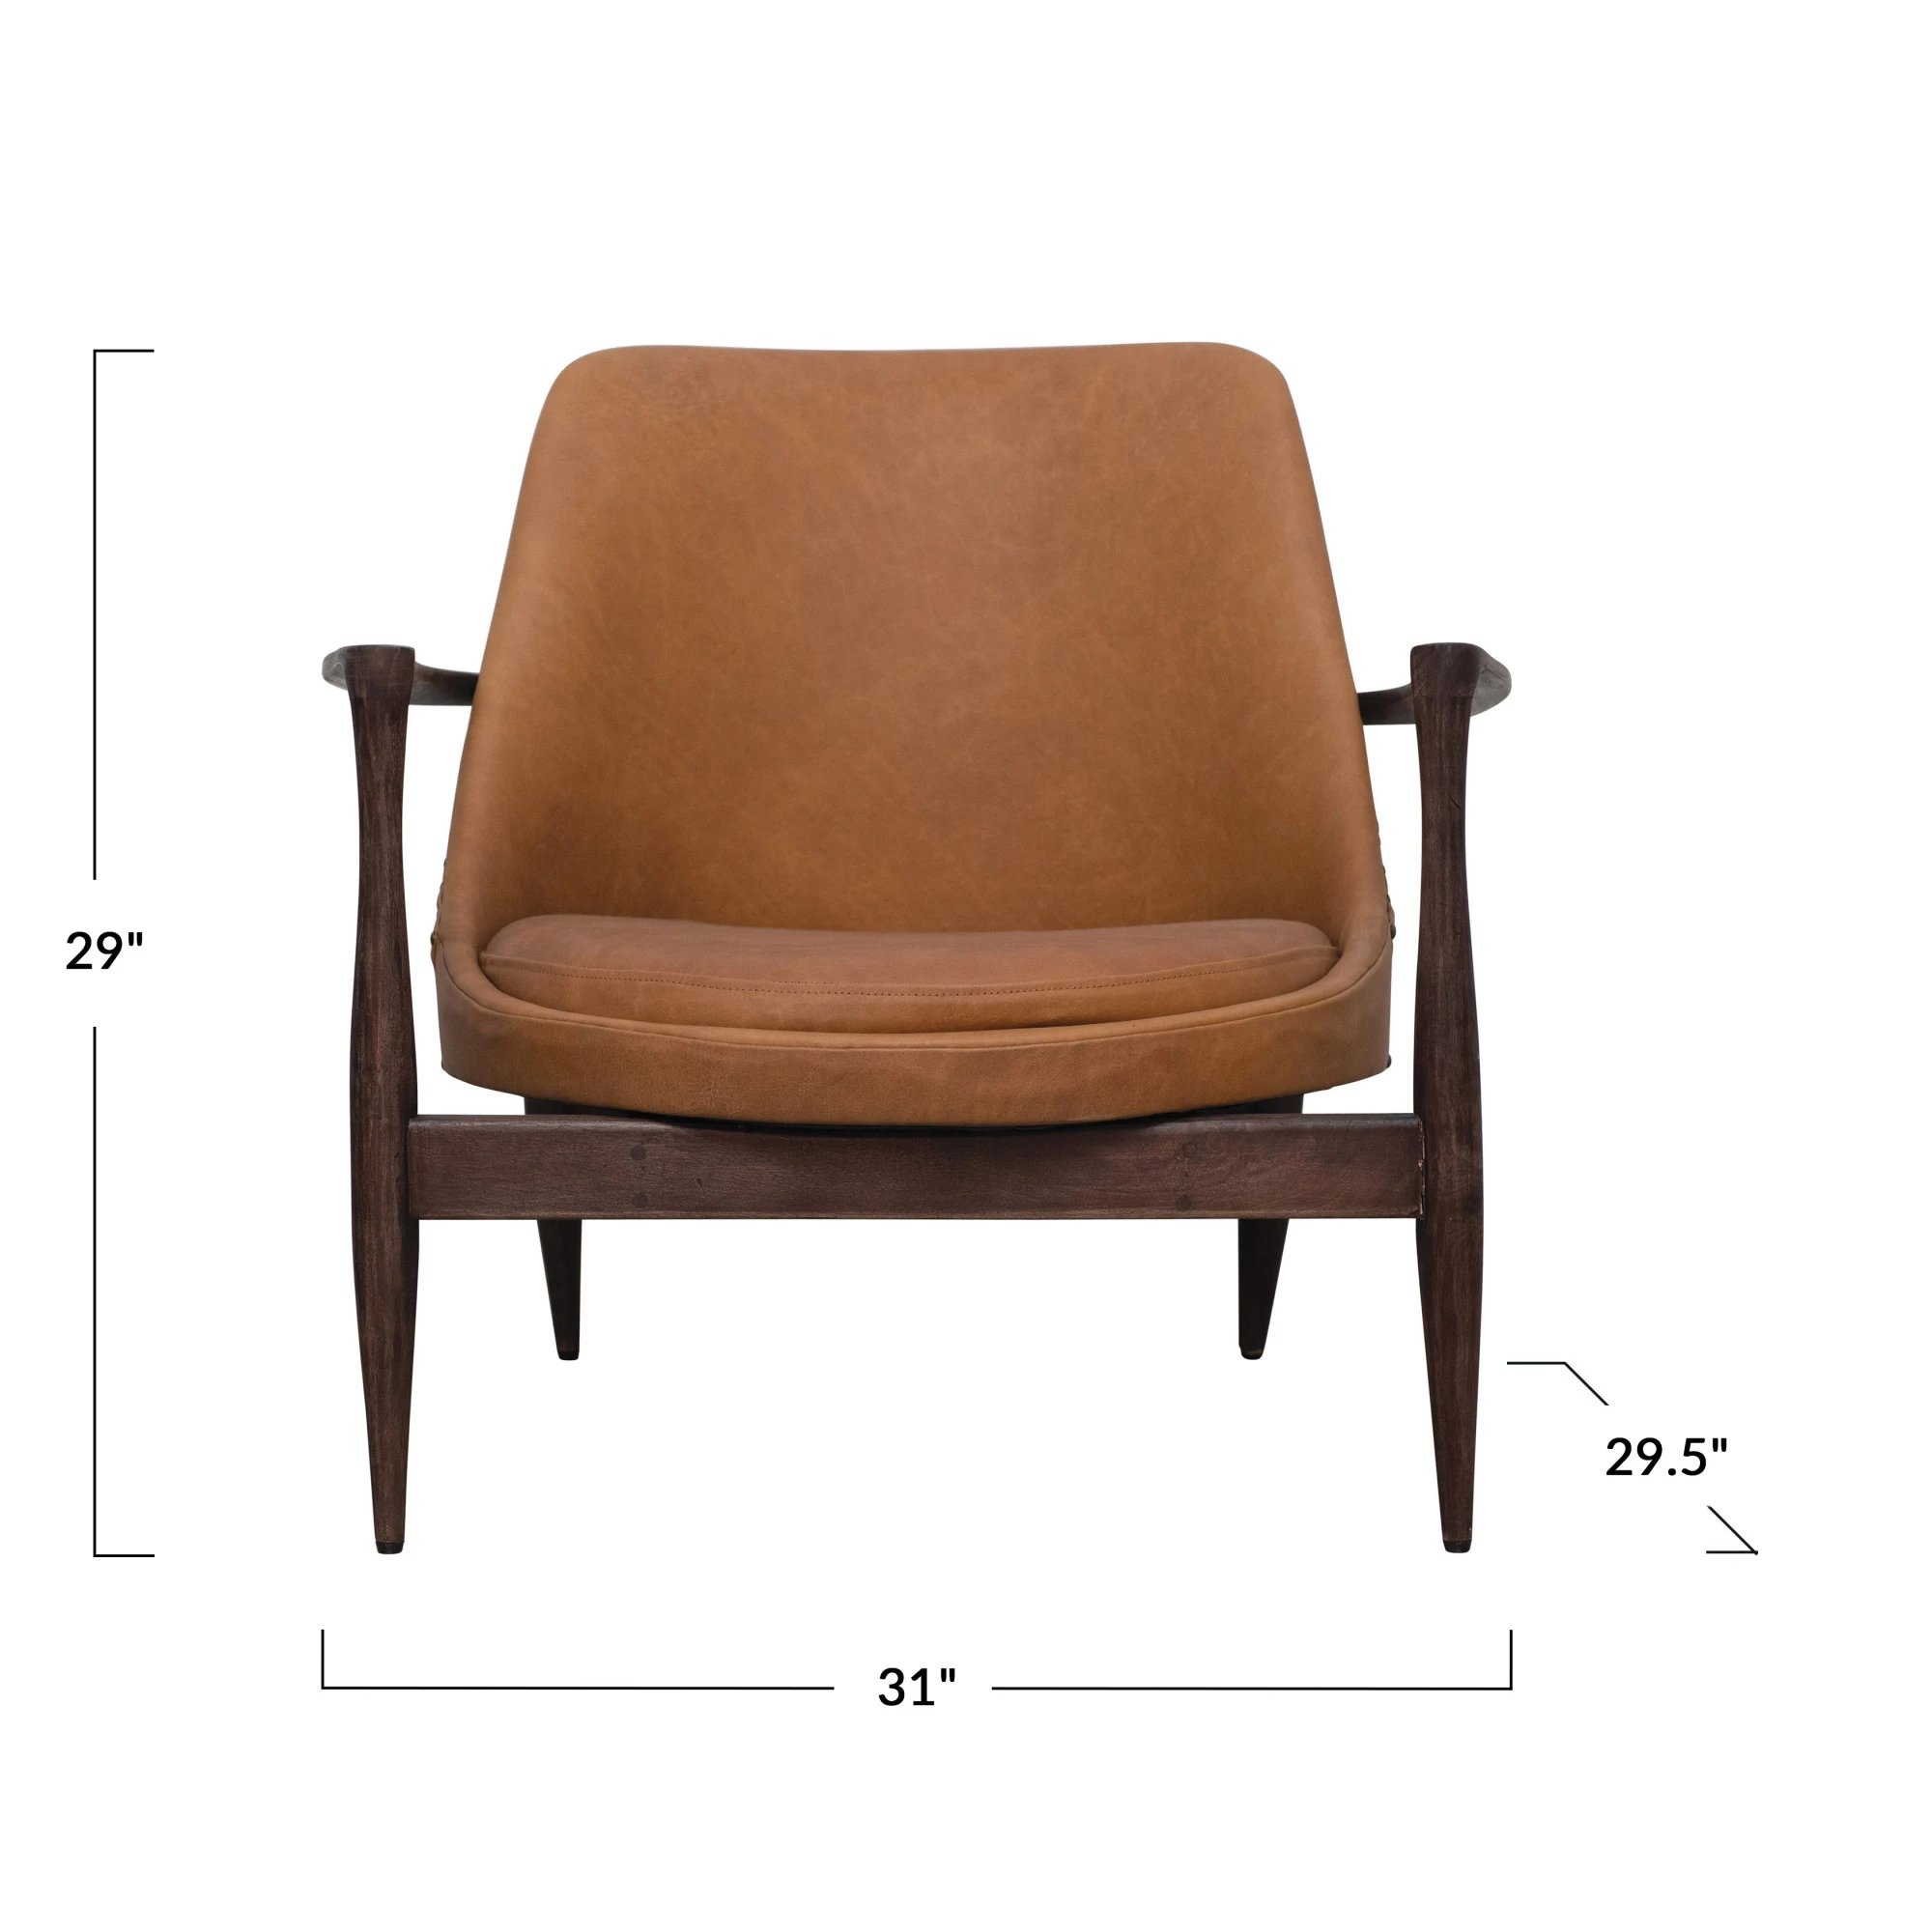 Leather Chair with Mango Wood Frame - Image 5